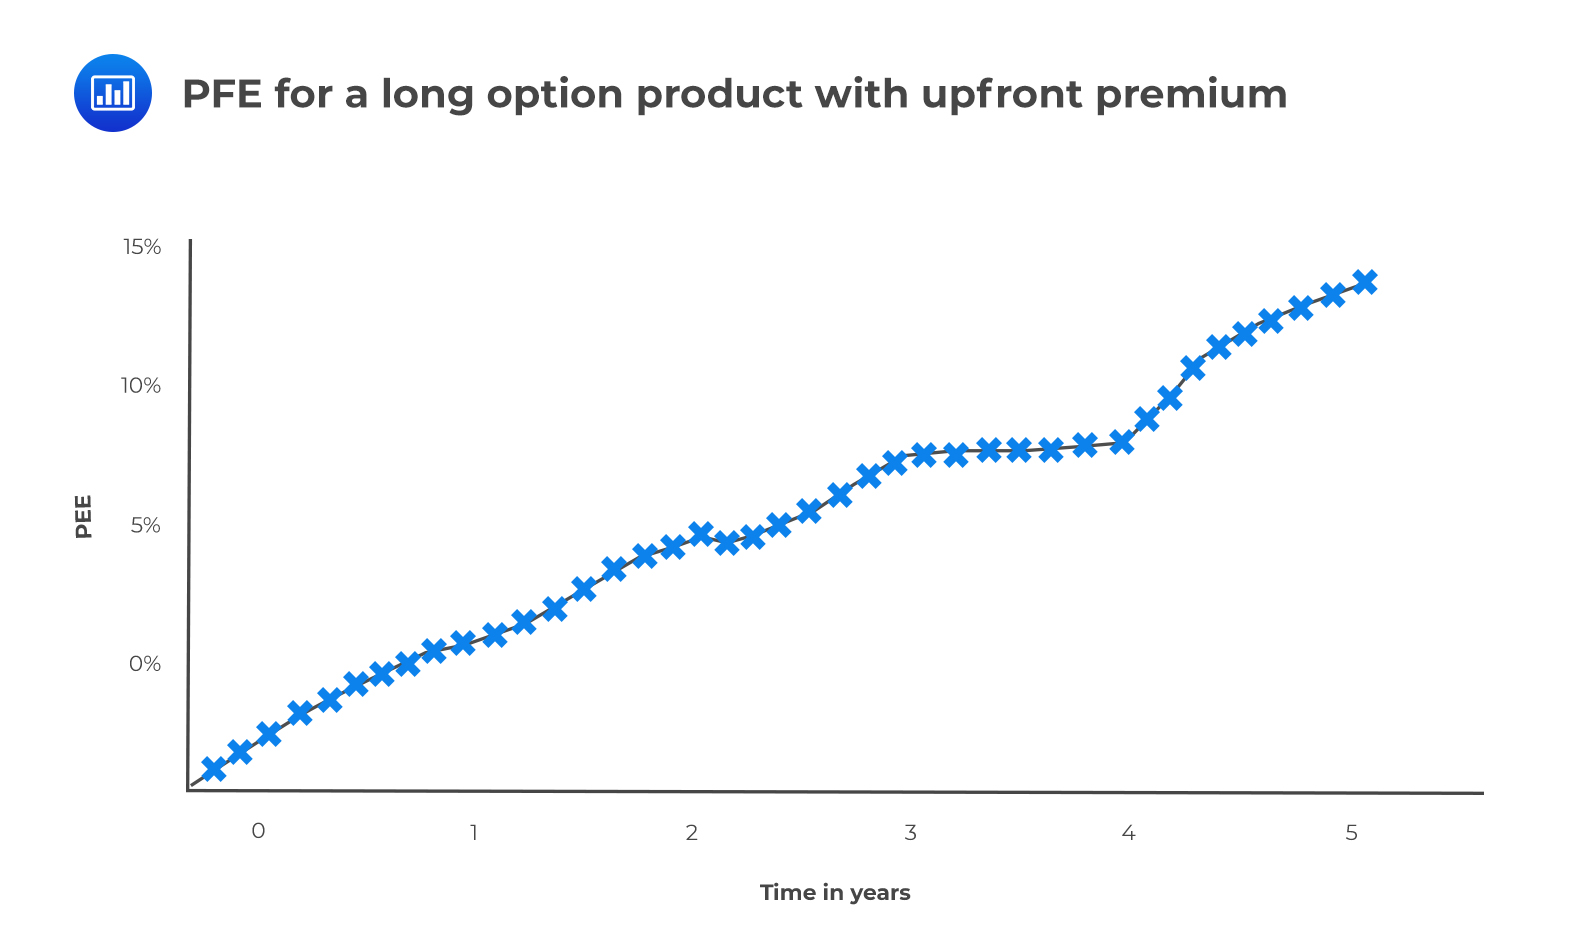 PFE for a long option product with upfront premium